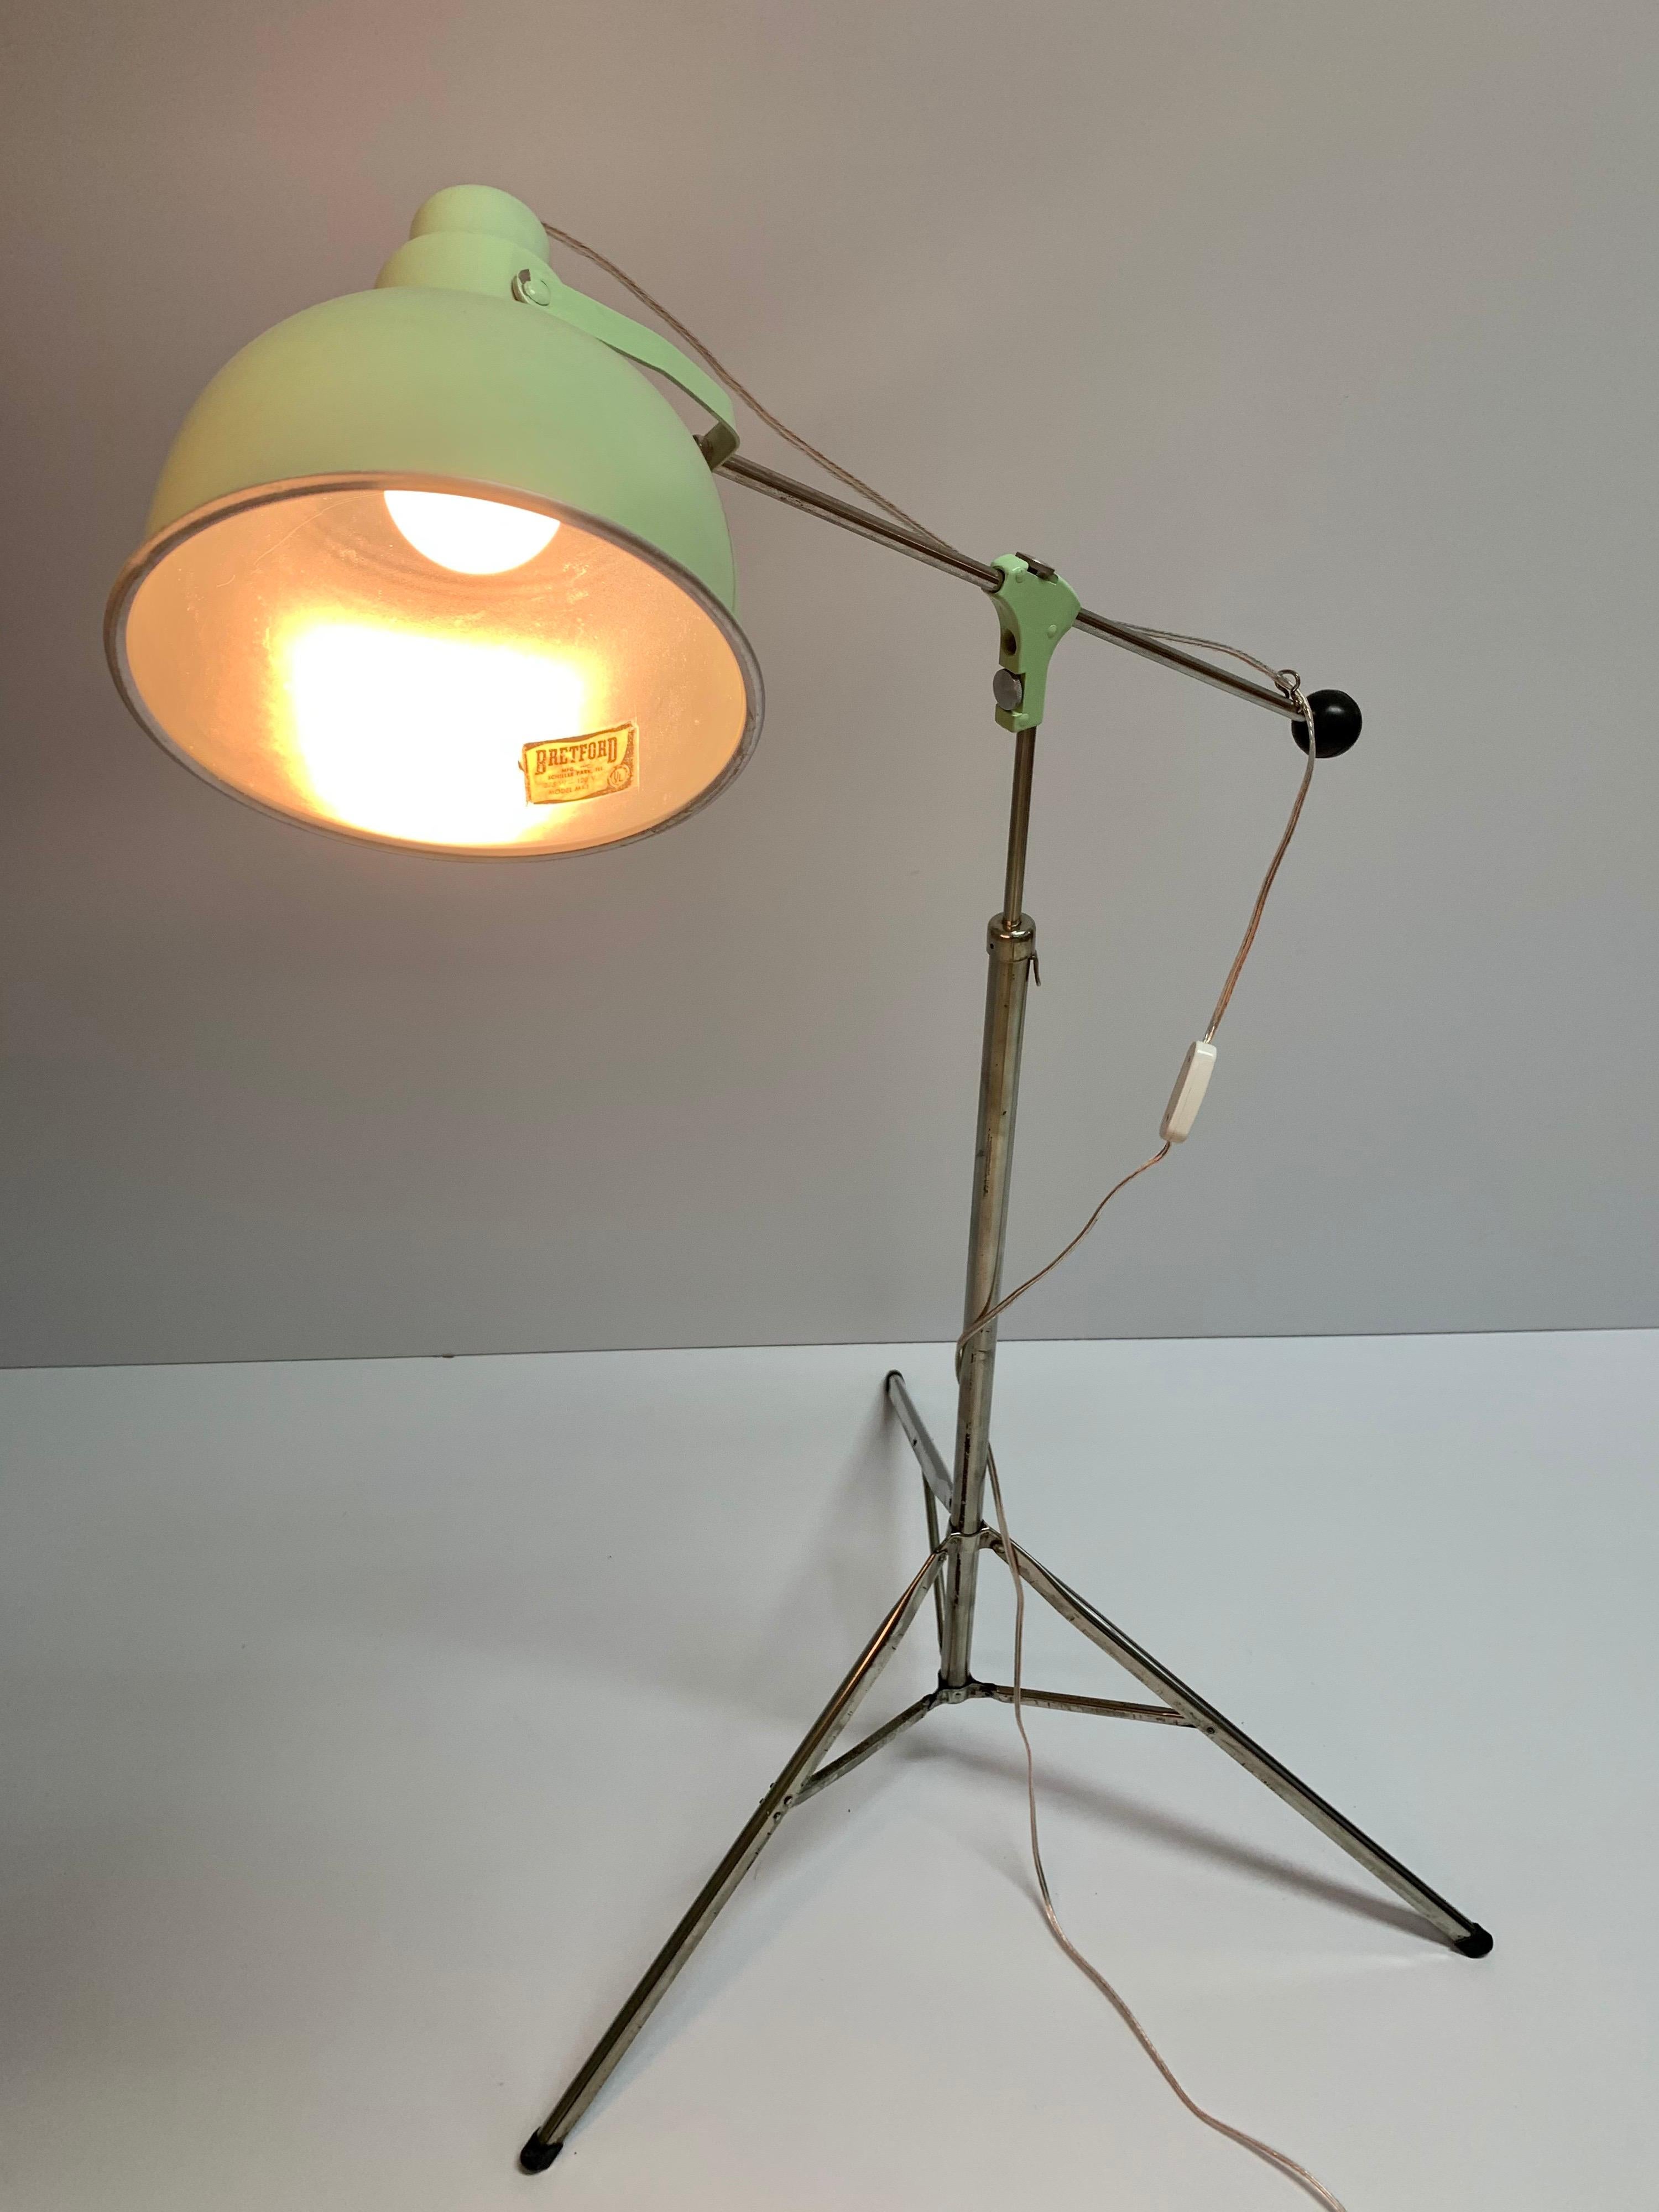 Vintage industrial telescoping adjustable floor lamp with a tripod base by Bretford Manufacturing Company of Franklin Park, Illinois, labeled “Model MJ-1.” The shade of the lamp can be tilted to adjust the angle of the light, and the arm slides back